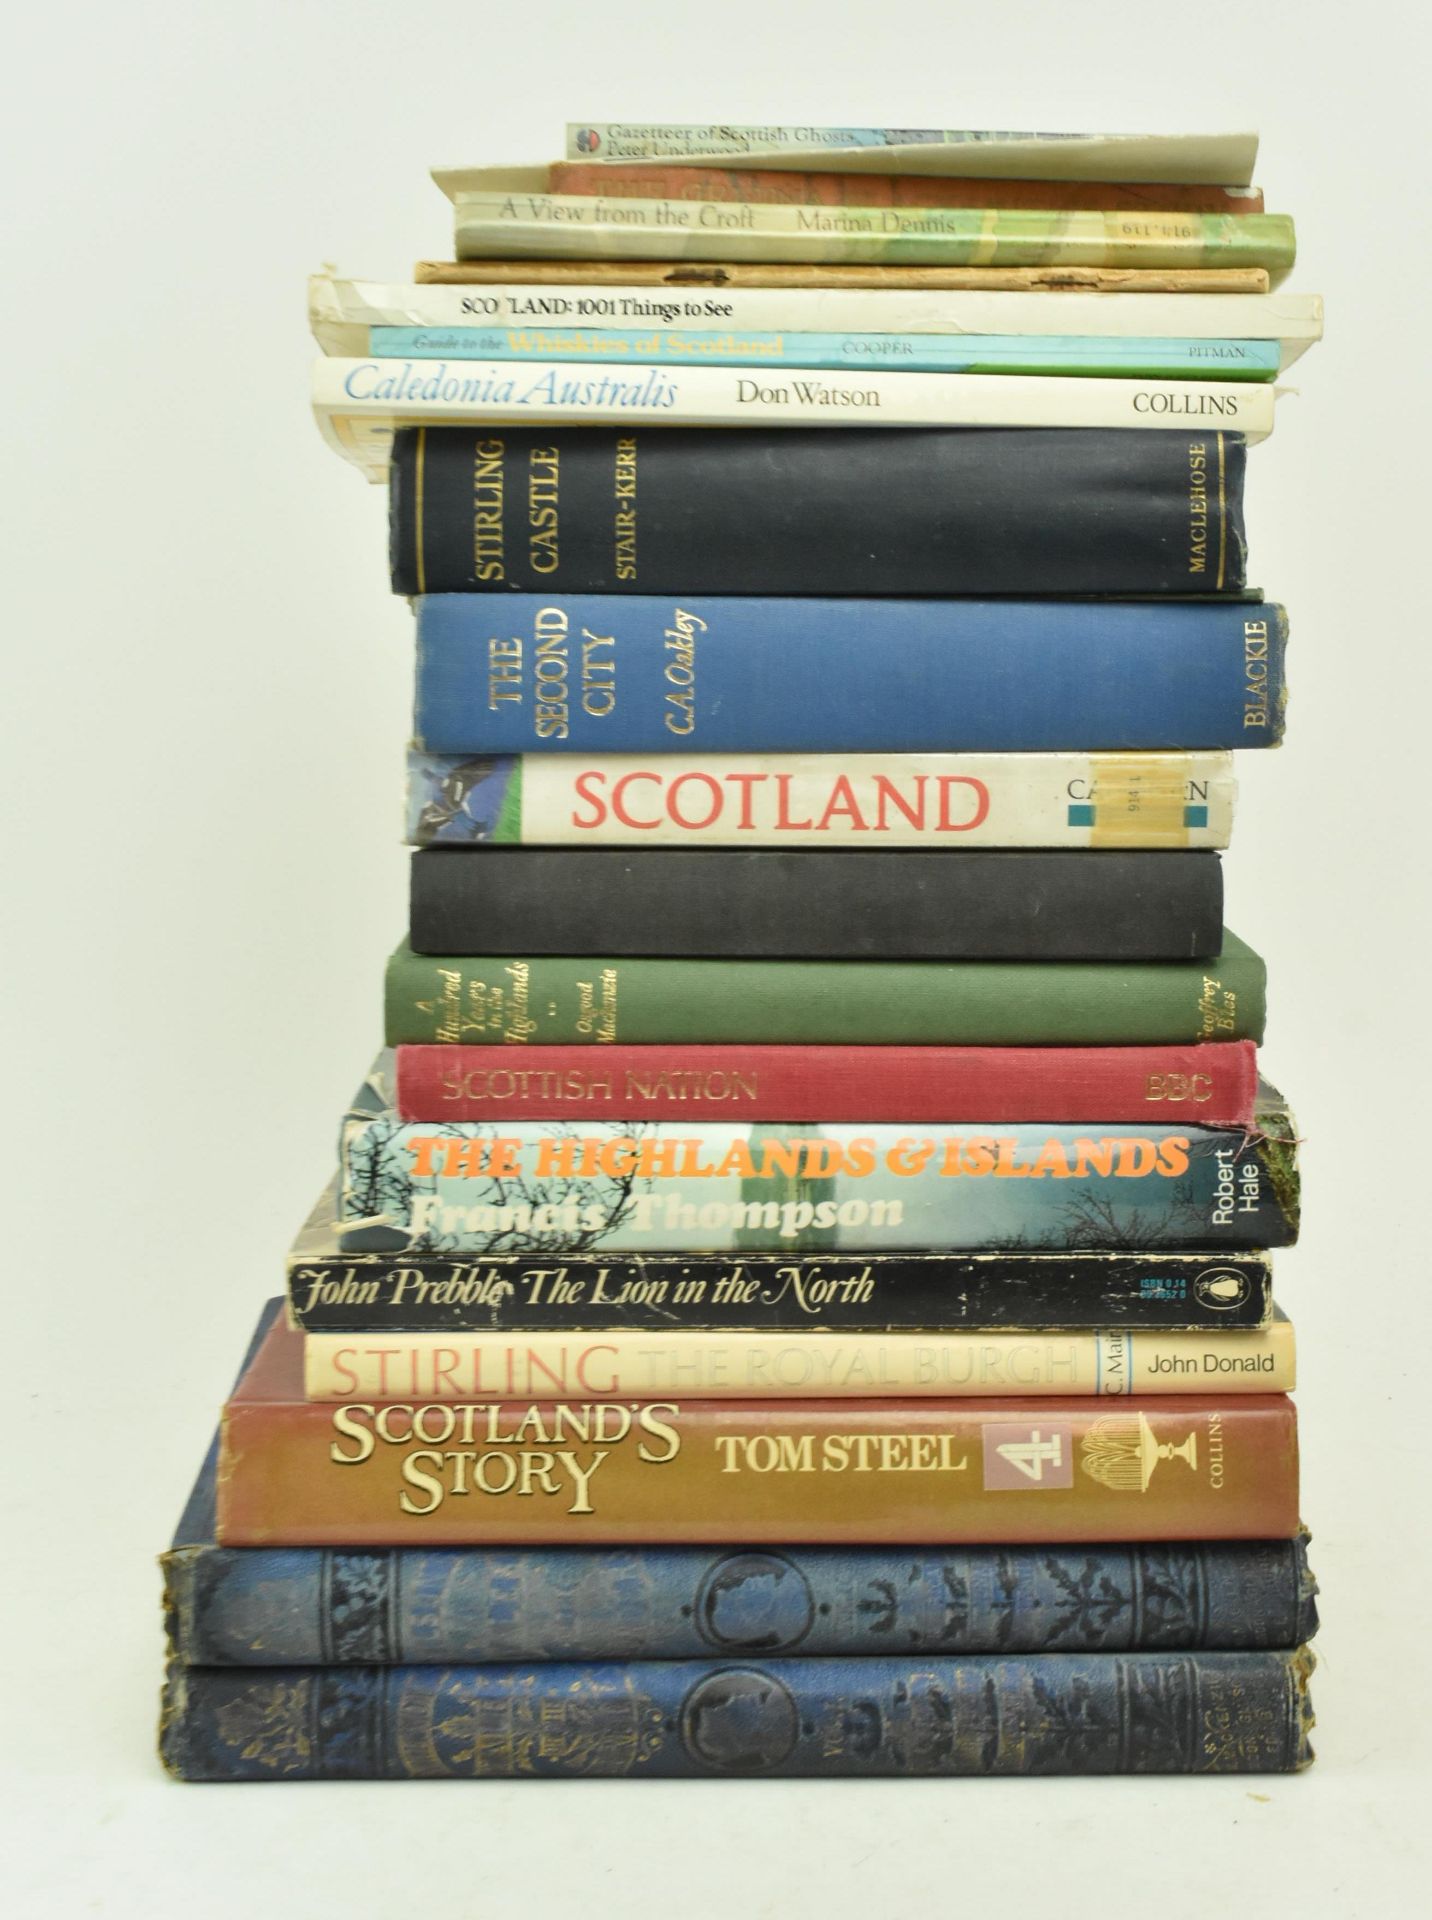 SCOTLAND. COLLECTION OF REFERENCE BOOKS ON SCOTTISH HISTORY - Image 2 of 6